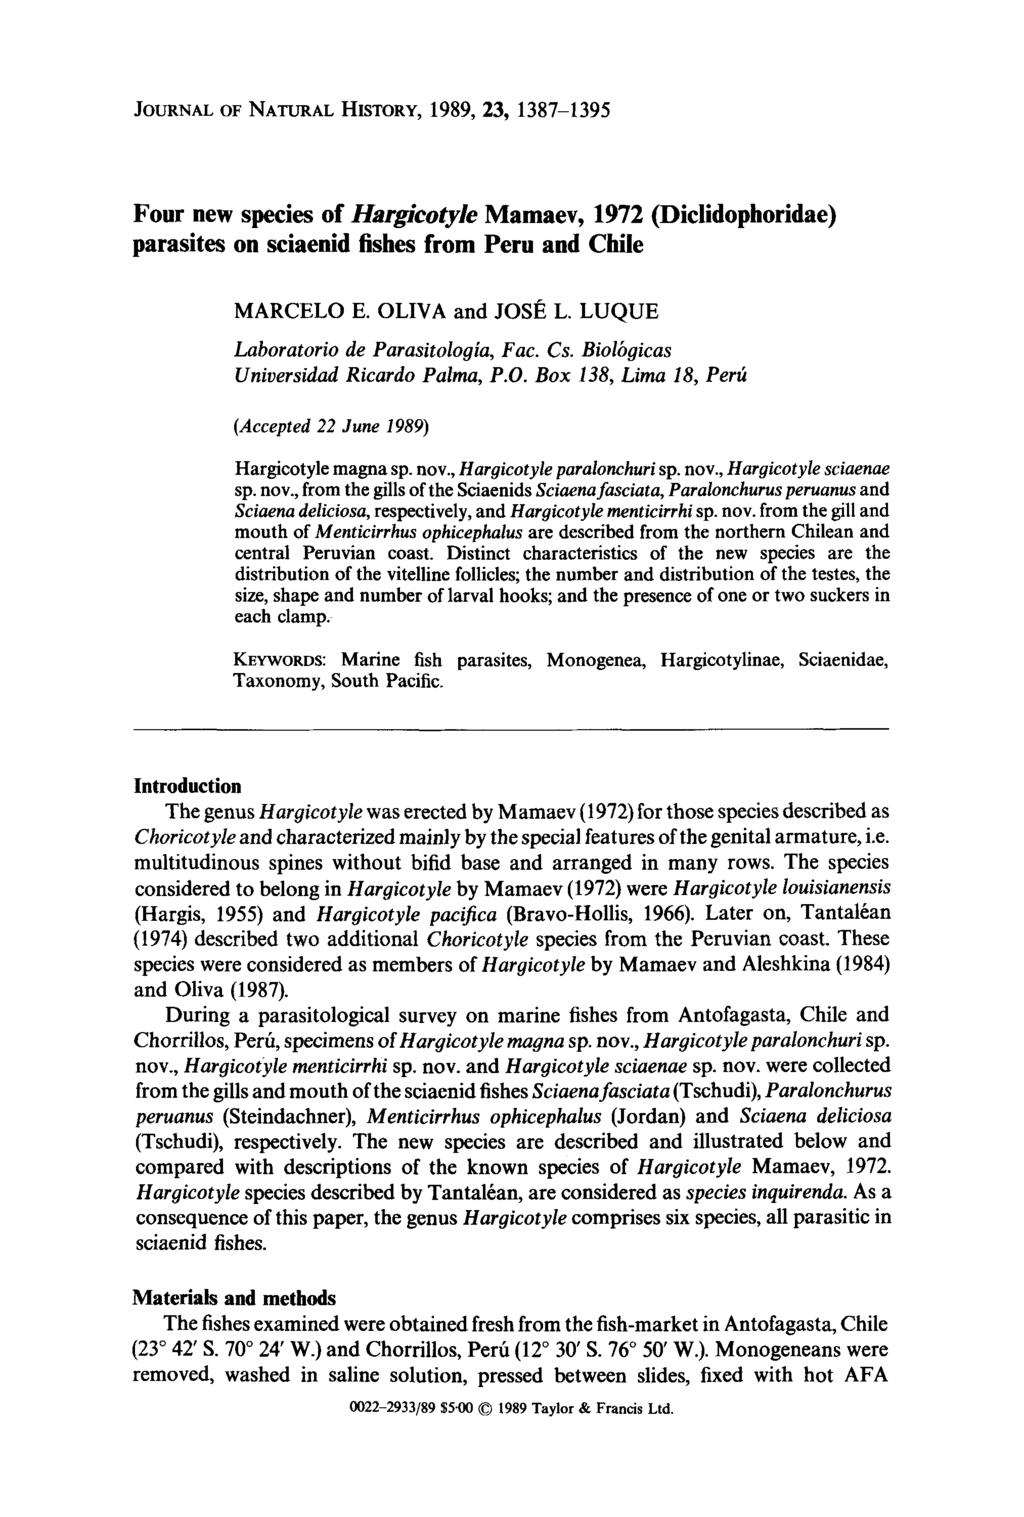 JOURNAL OF NATURAL HISTORY, 1989, 23, 1387-1395 Four new species of Hargicotyle Mamaev, 1972 (Diclidophoridae) parasites on sciaenid fishes from Peru and Chile MARCELO E. OLIVA and JOSl~ L.